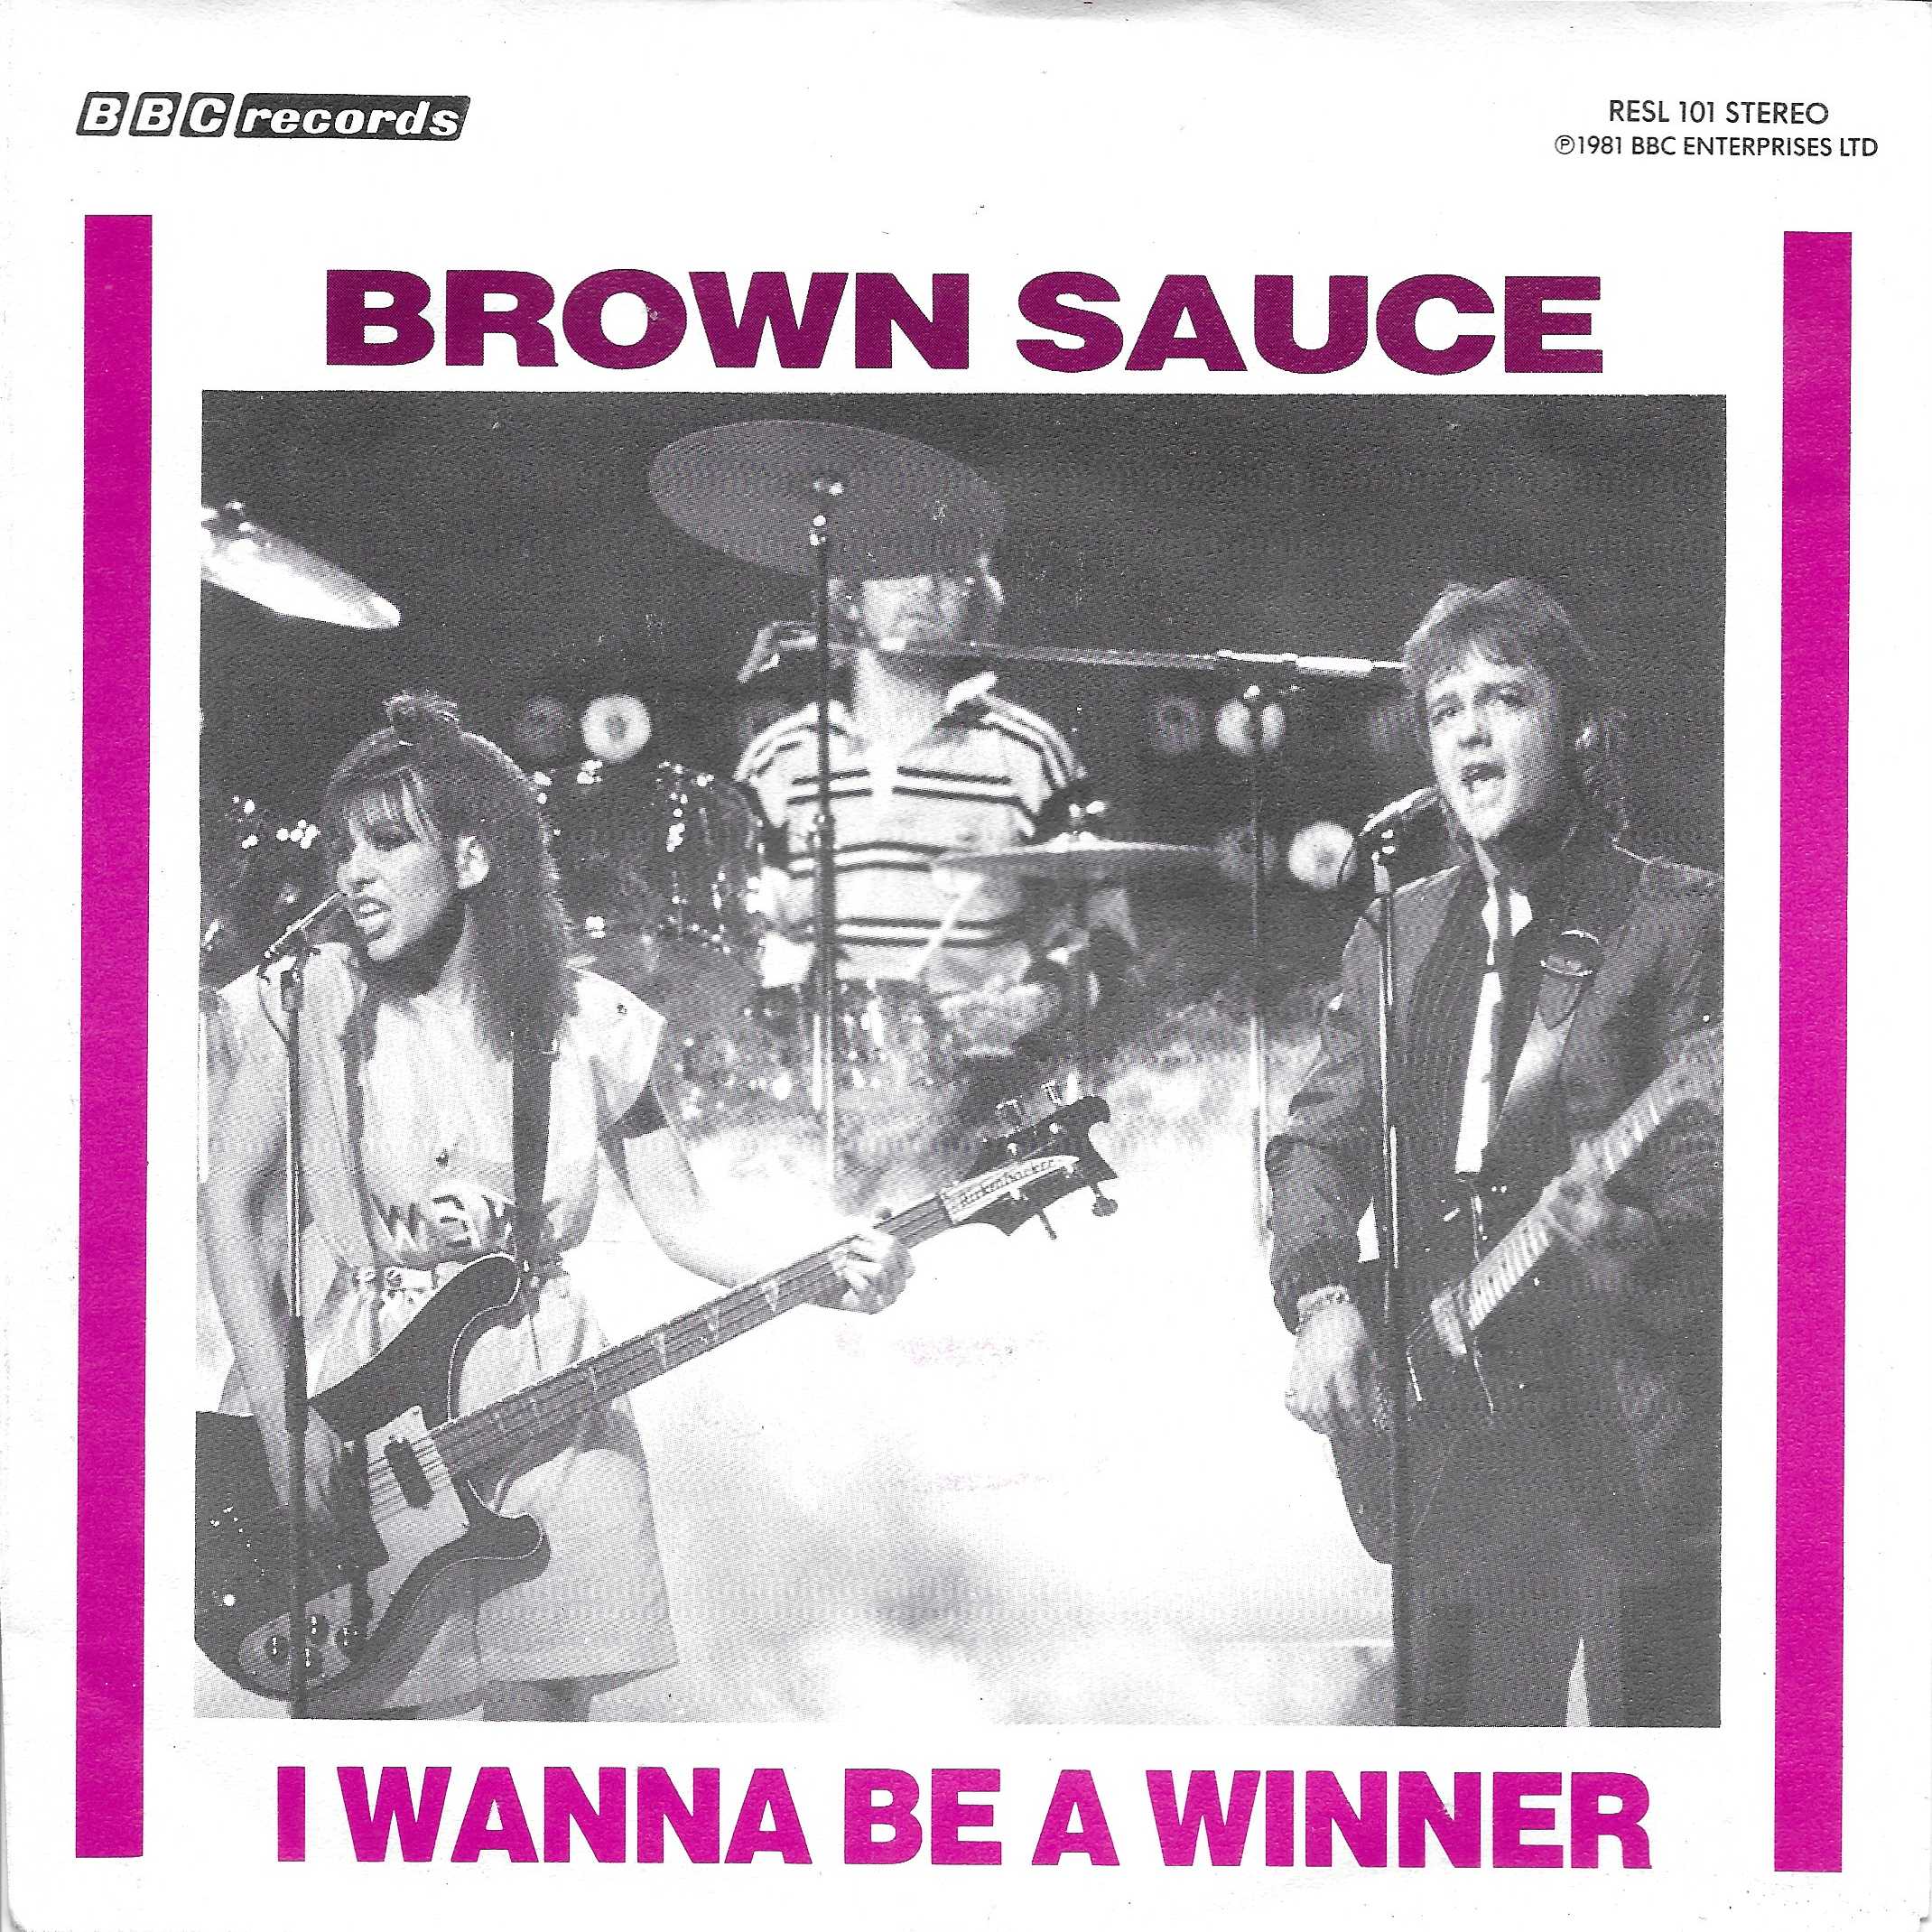 Picture of RESL 101-iD I wanna be a winner (Swap shop) by artist B. A. Robertson from the BBC singles - Records and Tapes library